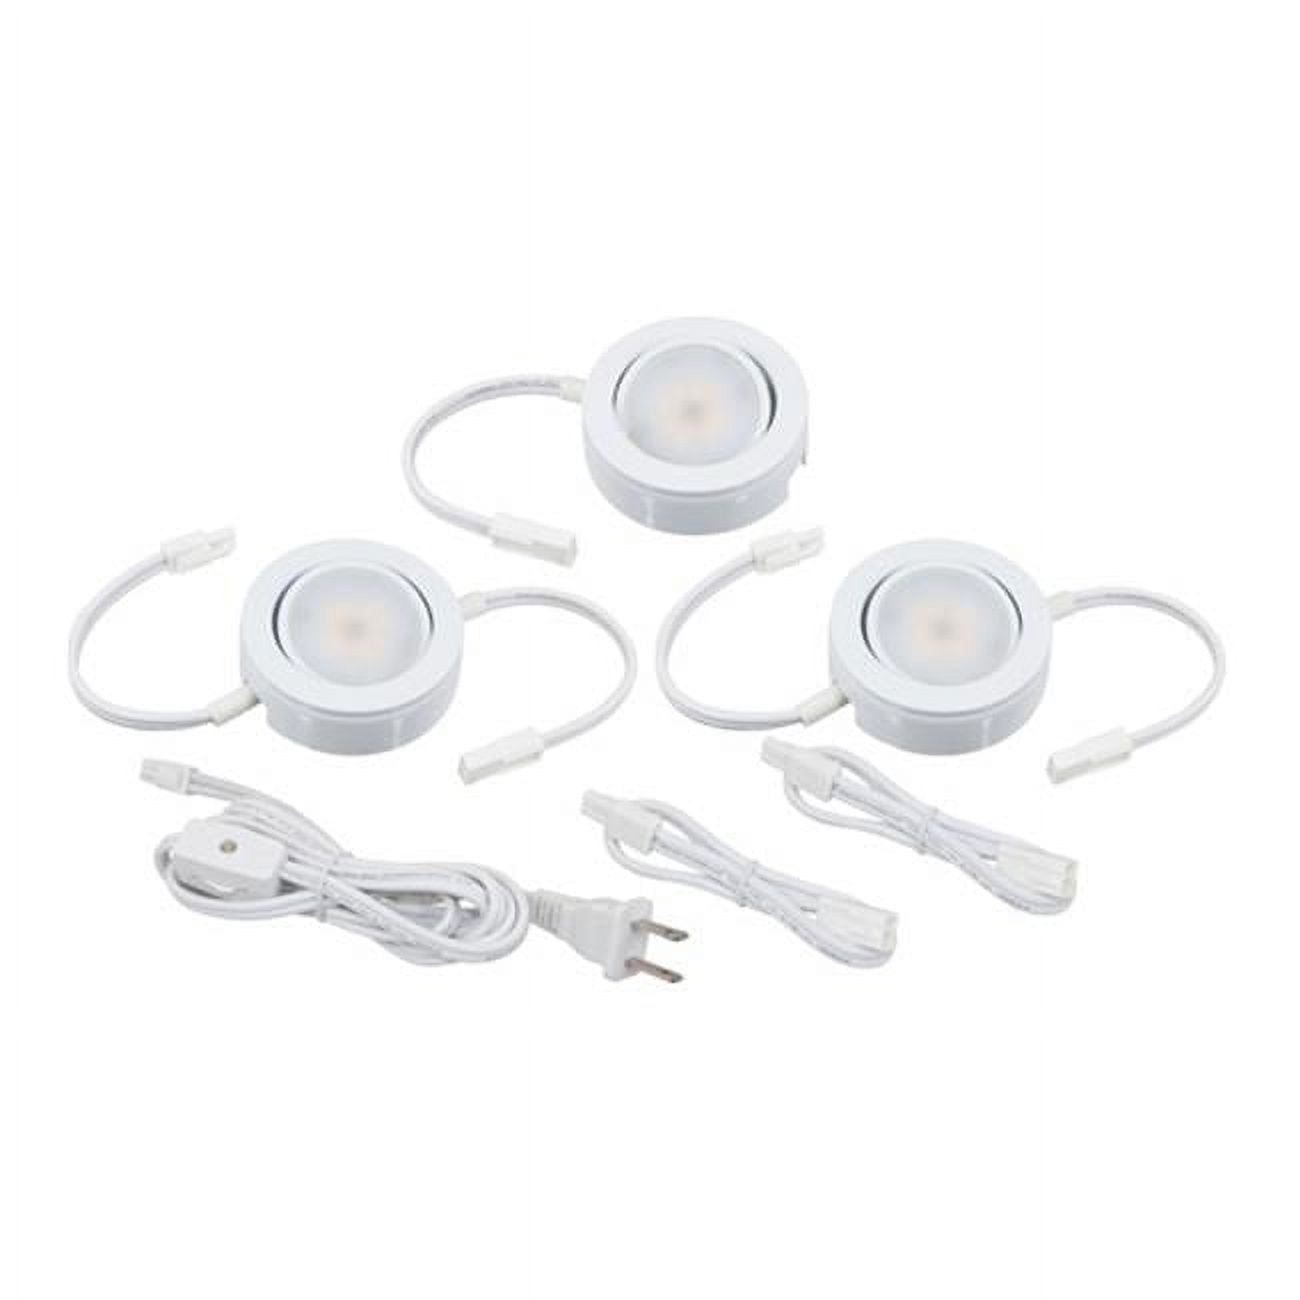 Picture of American Lighting MVP-3-30-WH 4.3W 120V 250 Lumens MVP 3 LED Light Puck Kit with Roll Switch & 6 ft. Power Cord - White